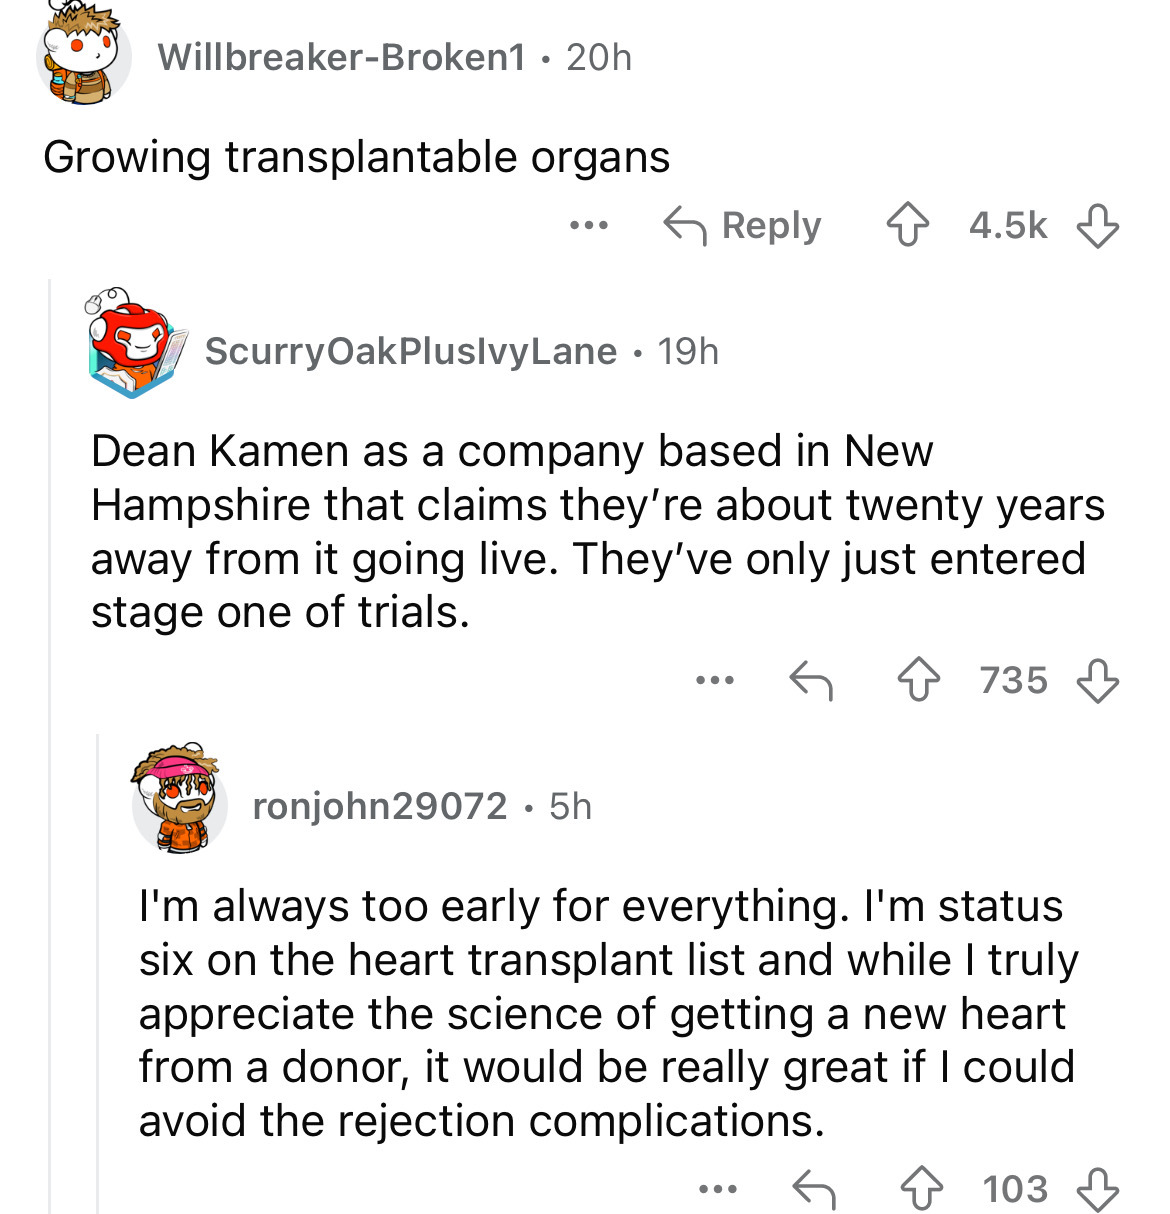 screenshot - WillbreakerBroken1 20h Growing transplantable organs ... ScurryOakPluslvyLane 19h Dean Kamen as a company based in New Hampshire that claims they're about twenty years away from it going live. They've only just entered stage one of trials. 73